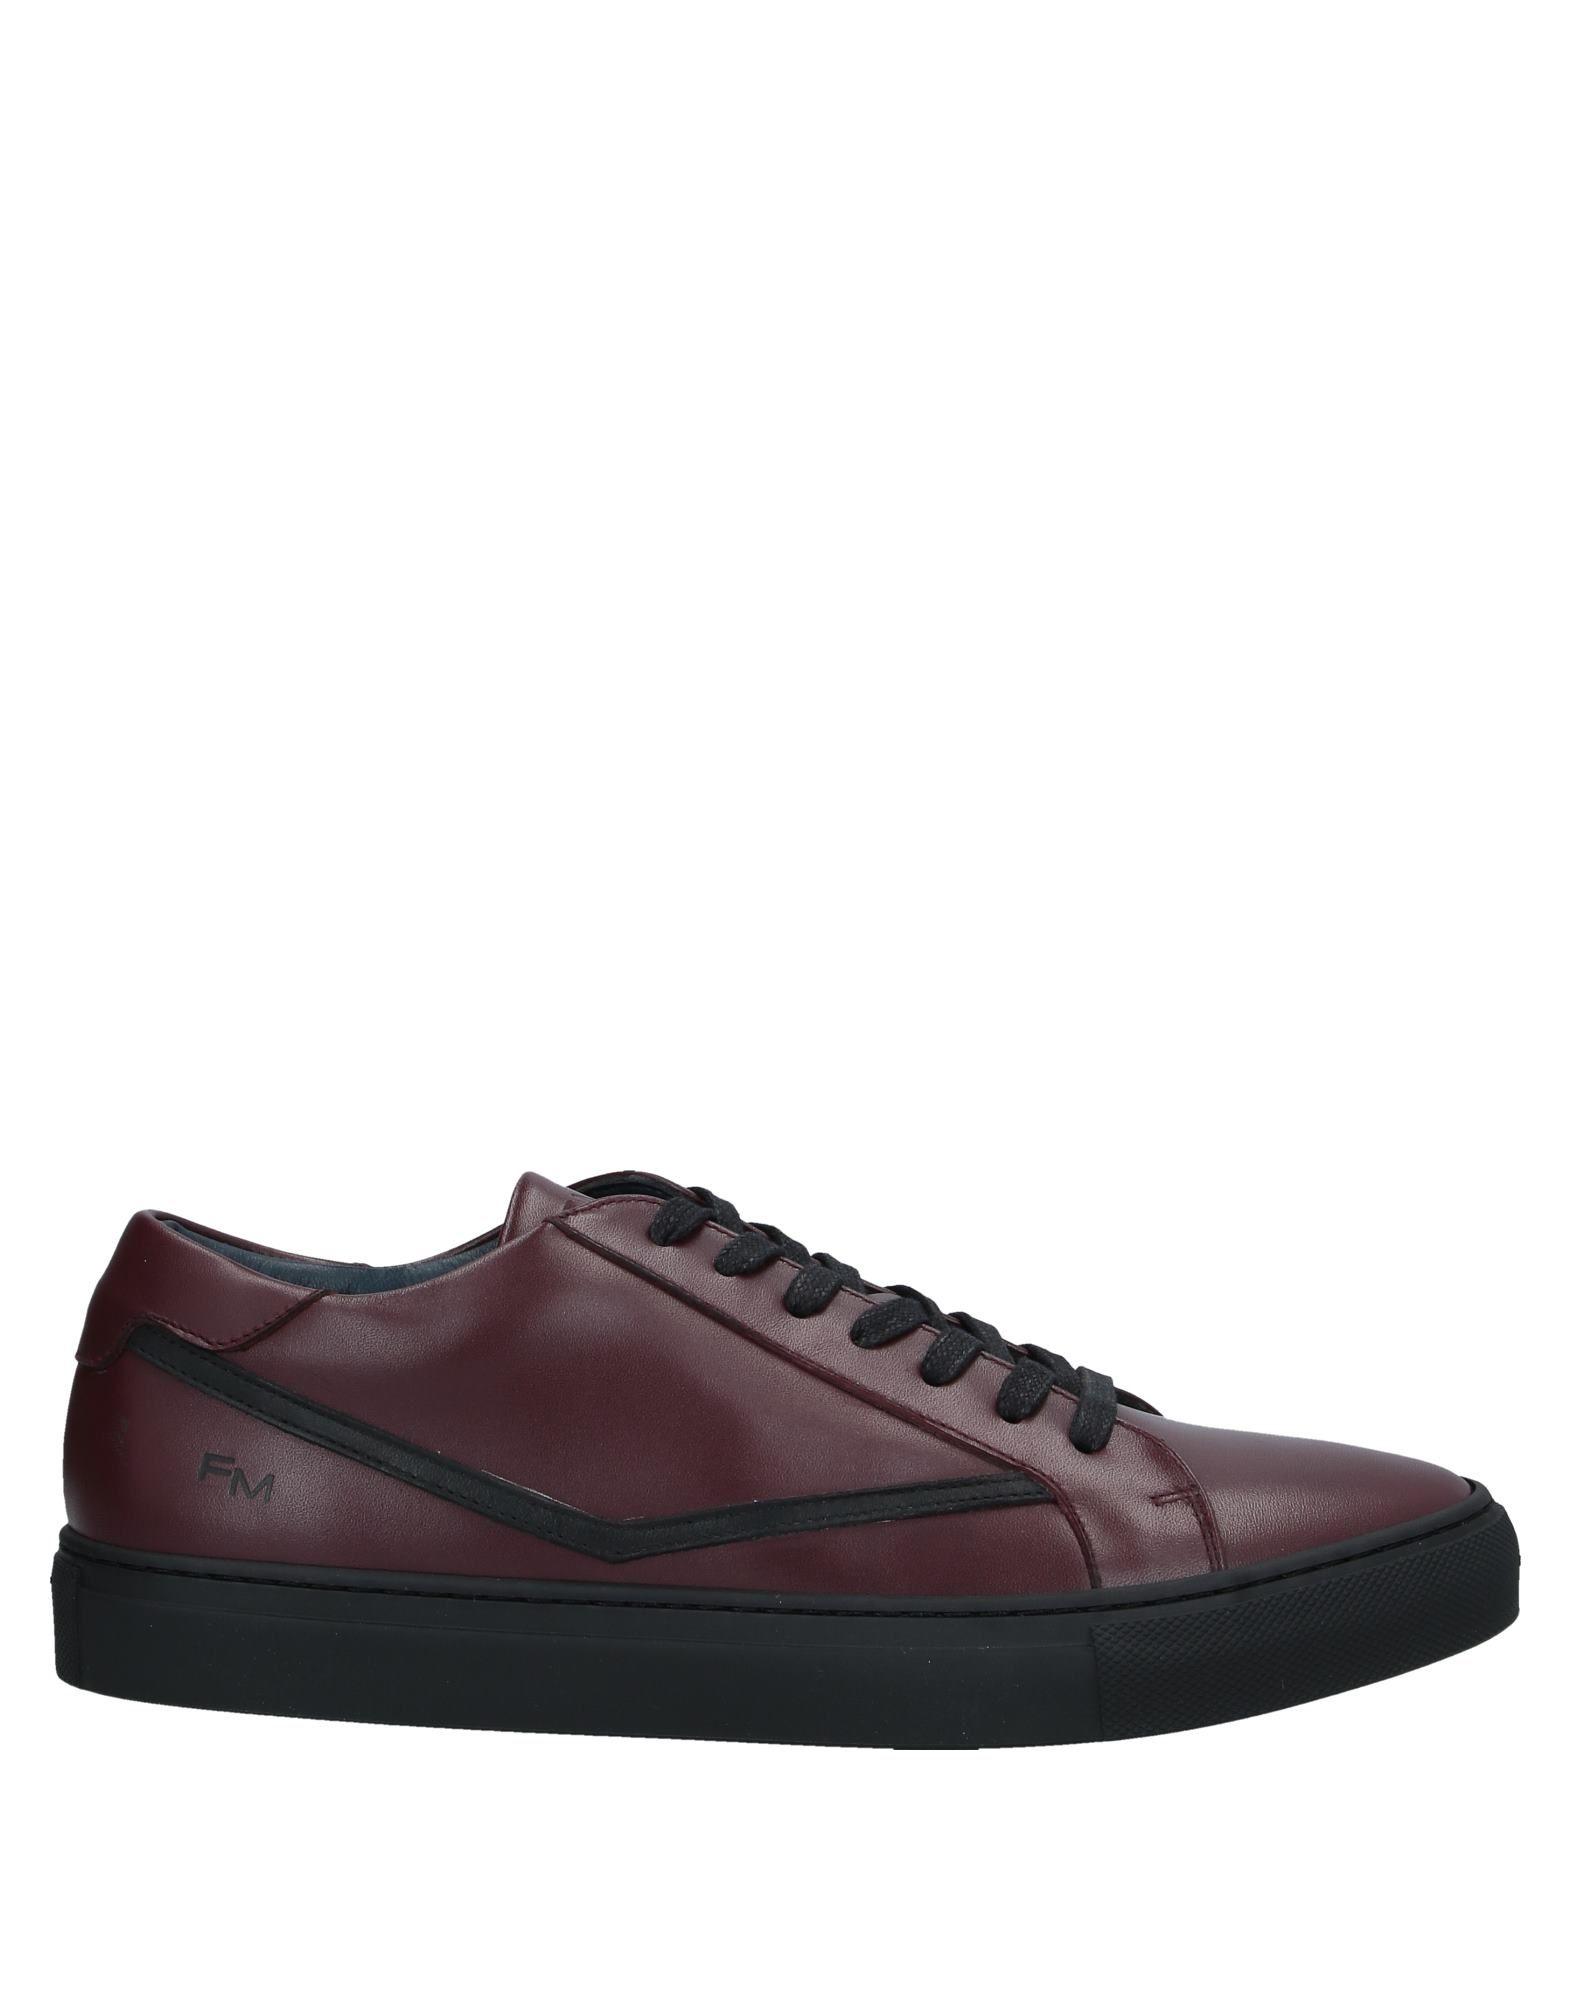 Fabiano Ricci Leather Low-tops & Sneakers for Men - Lyst